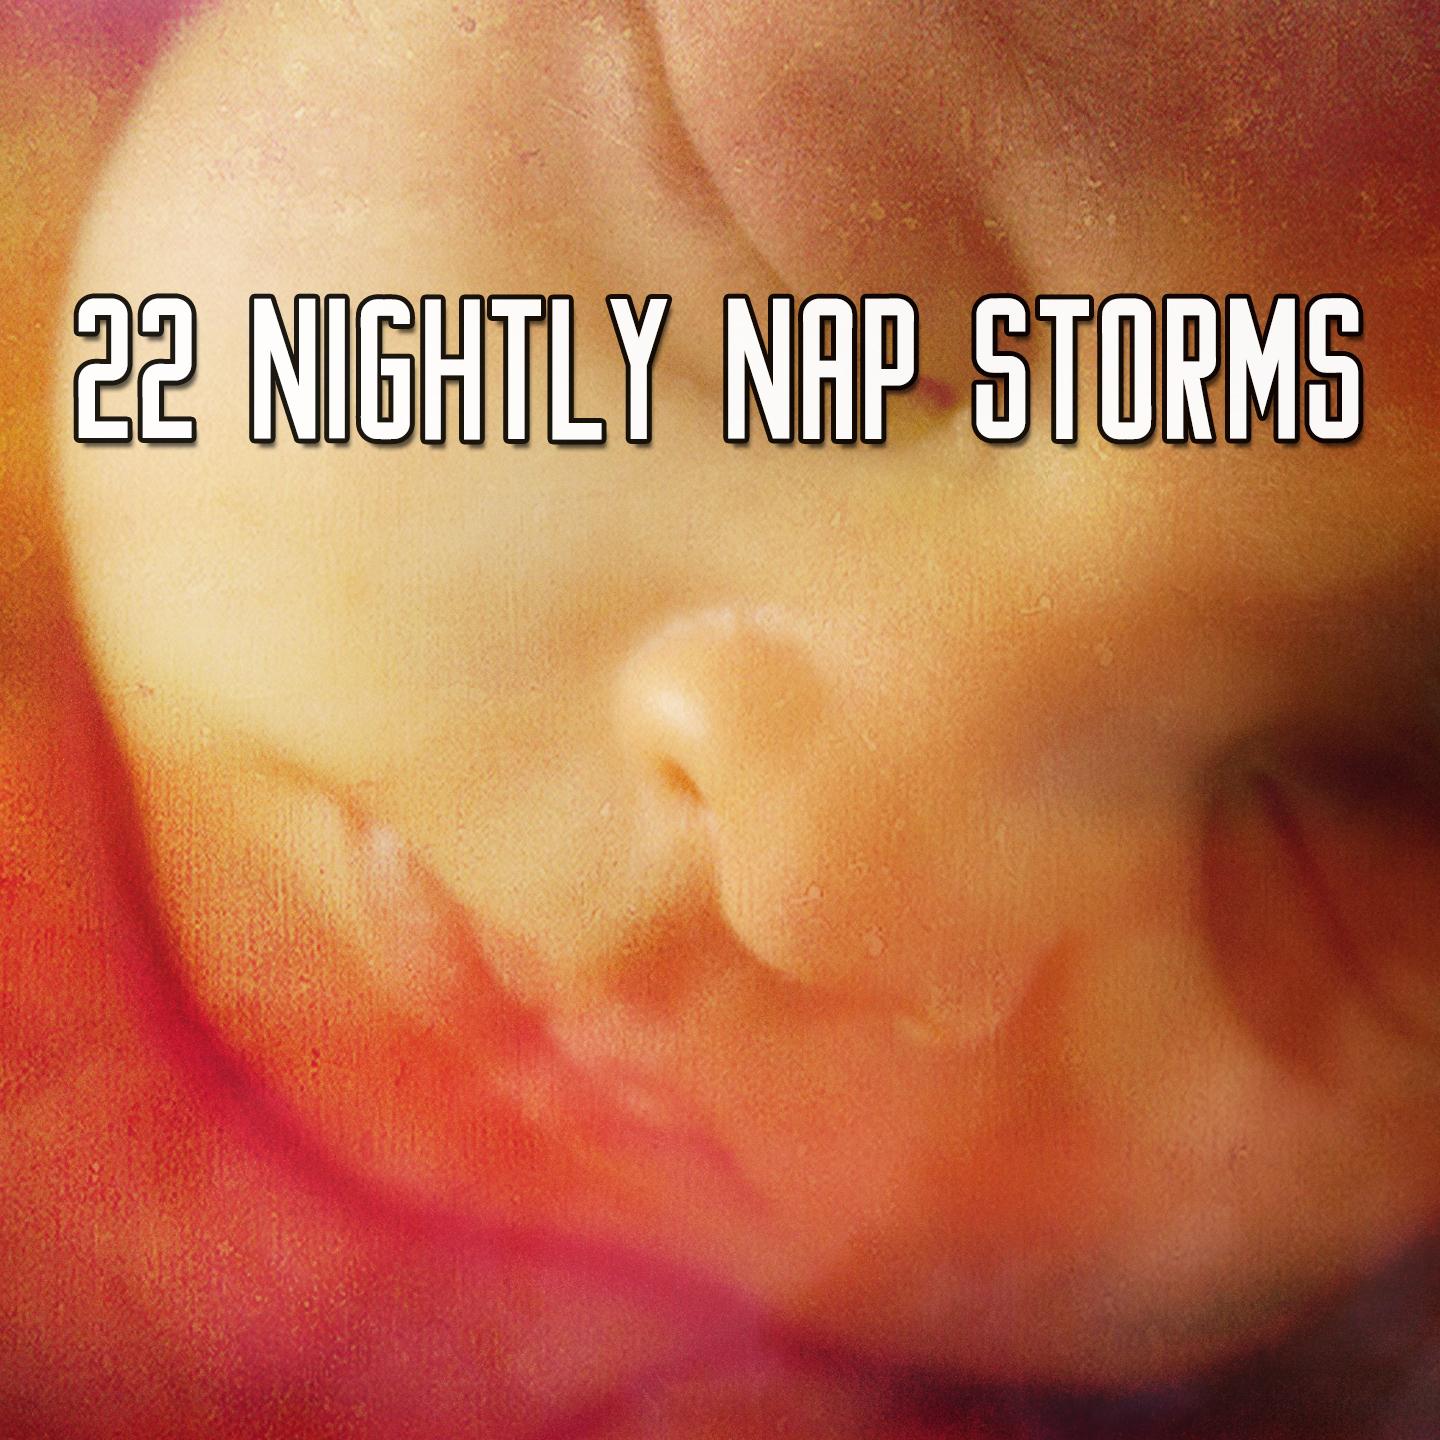 22 Nightly Nap Storms